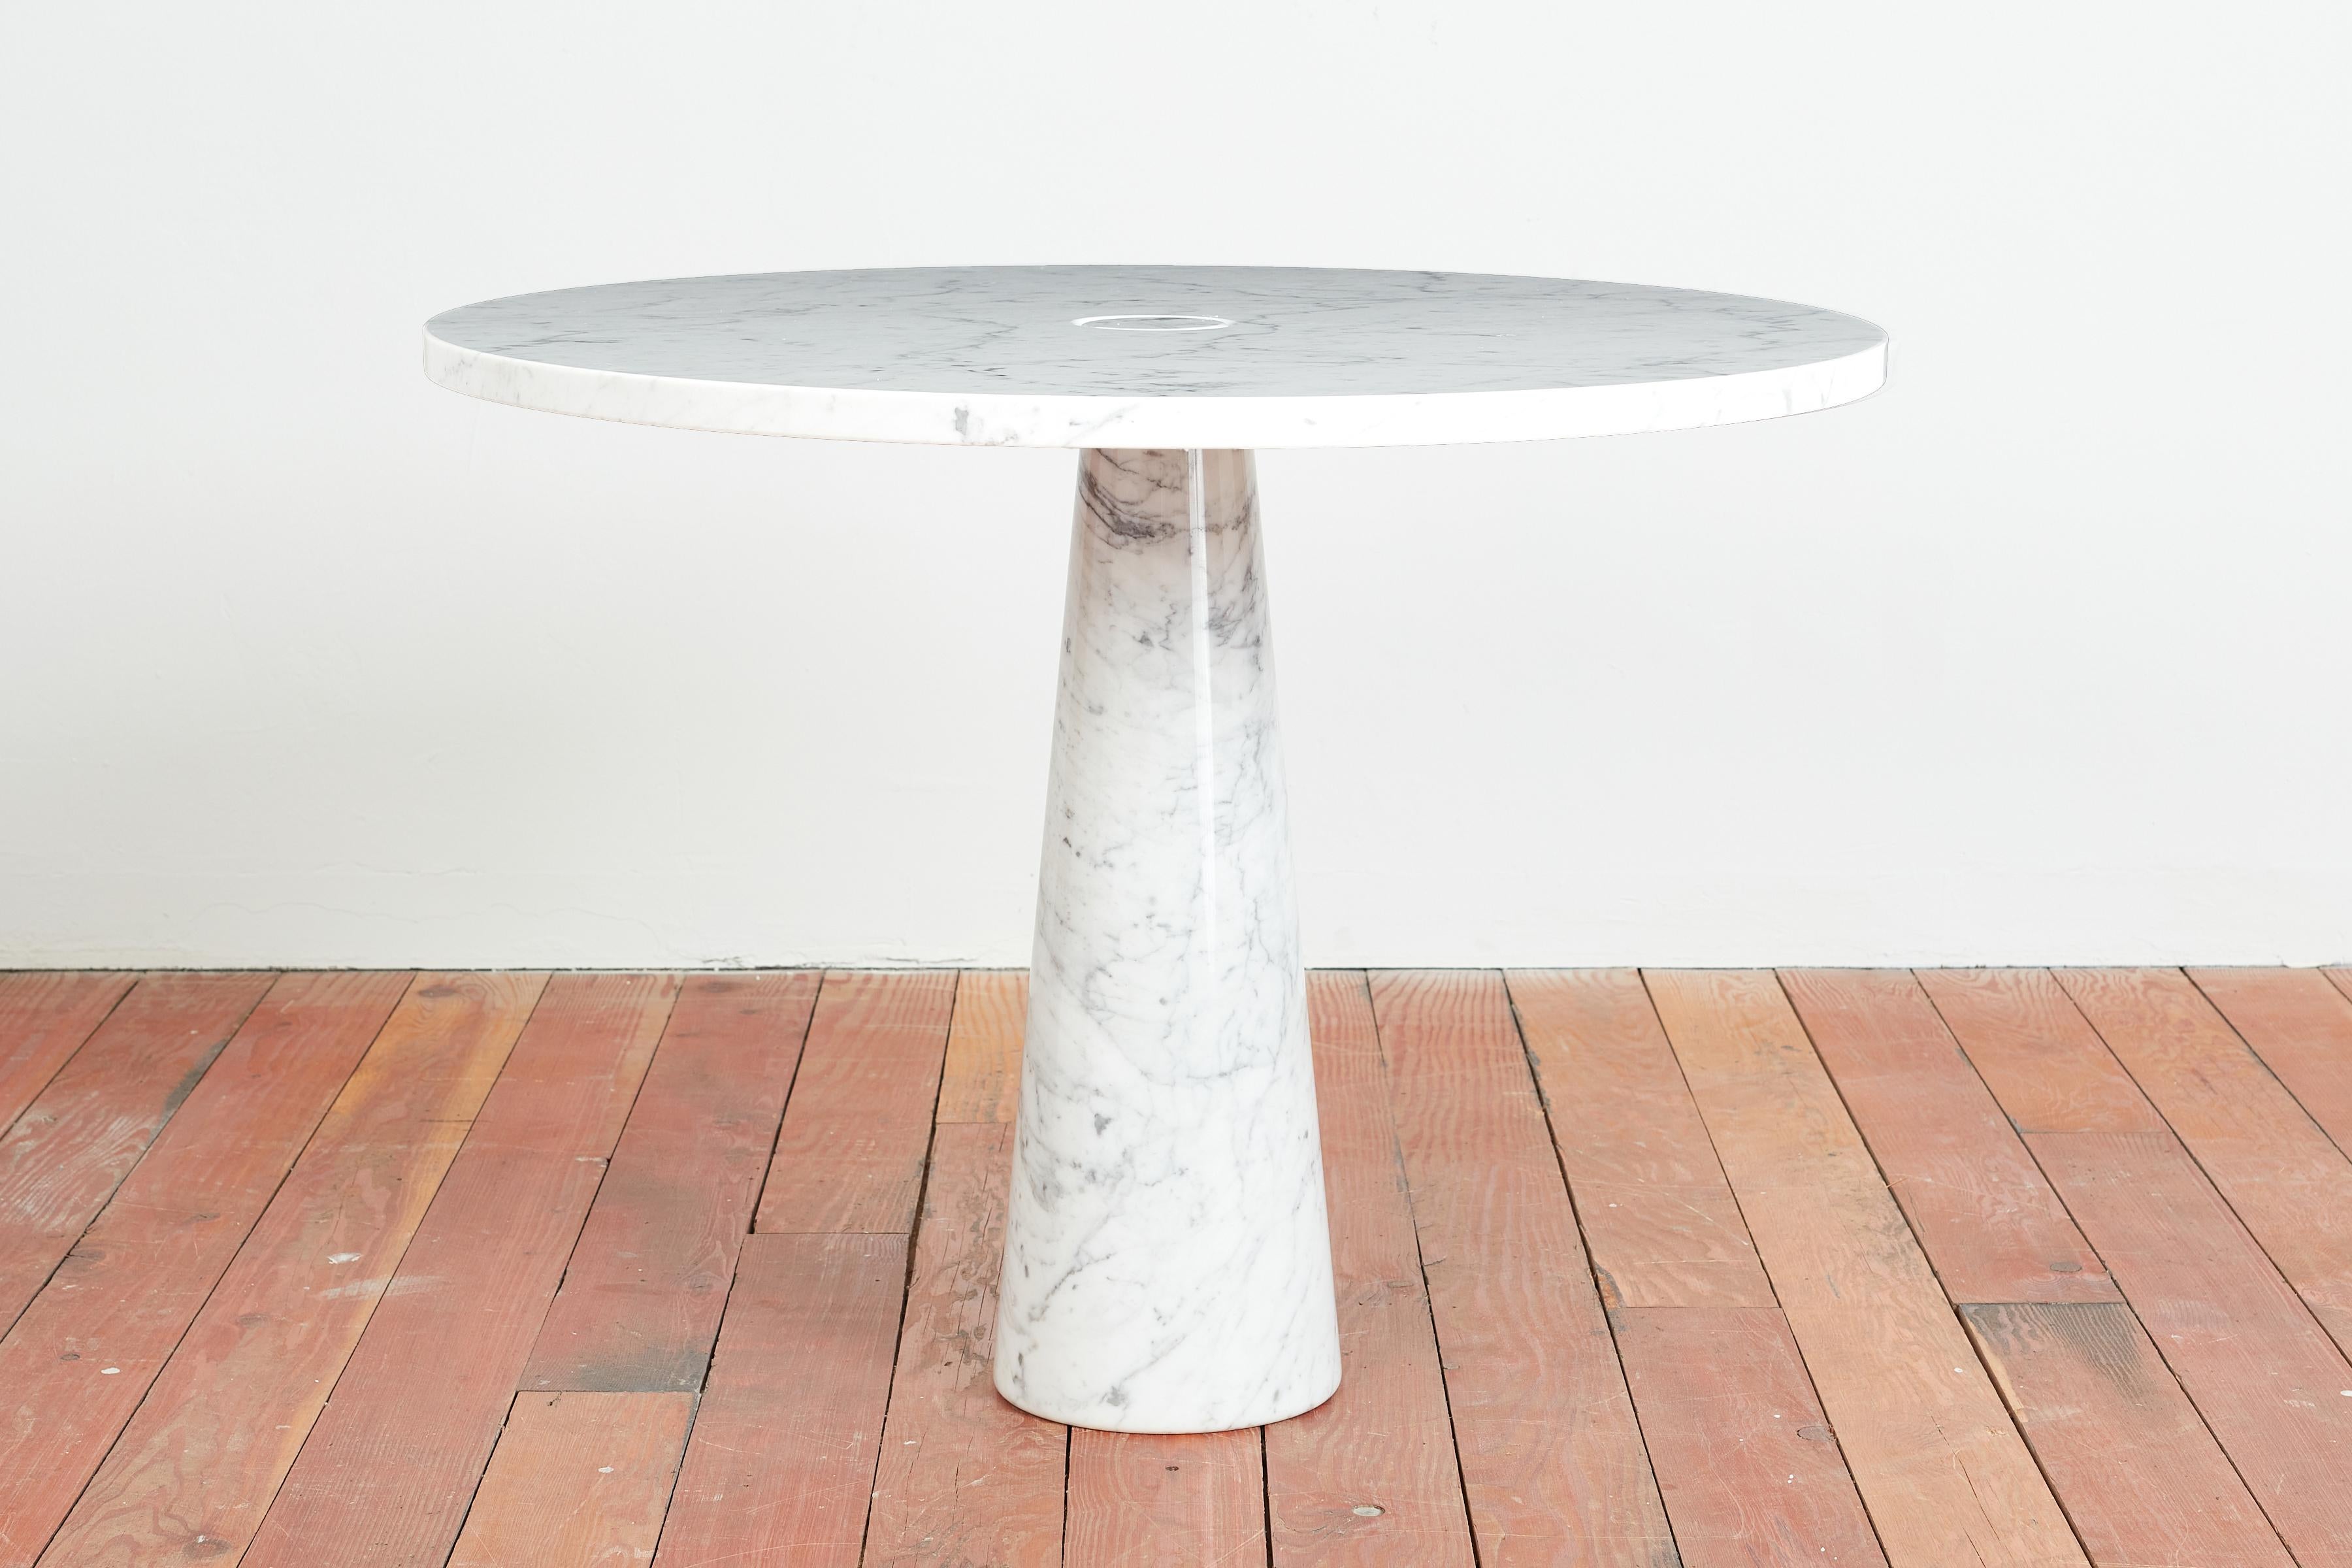 Round table by  Angelo Mangiarotti for Skipper
Italy, 1970s
Original Skipper label 
Solid Carrara marble pedestal base with marble top 
Great as a center table or petite breakfast nook.